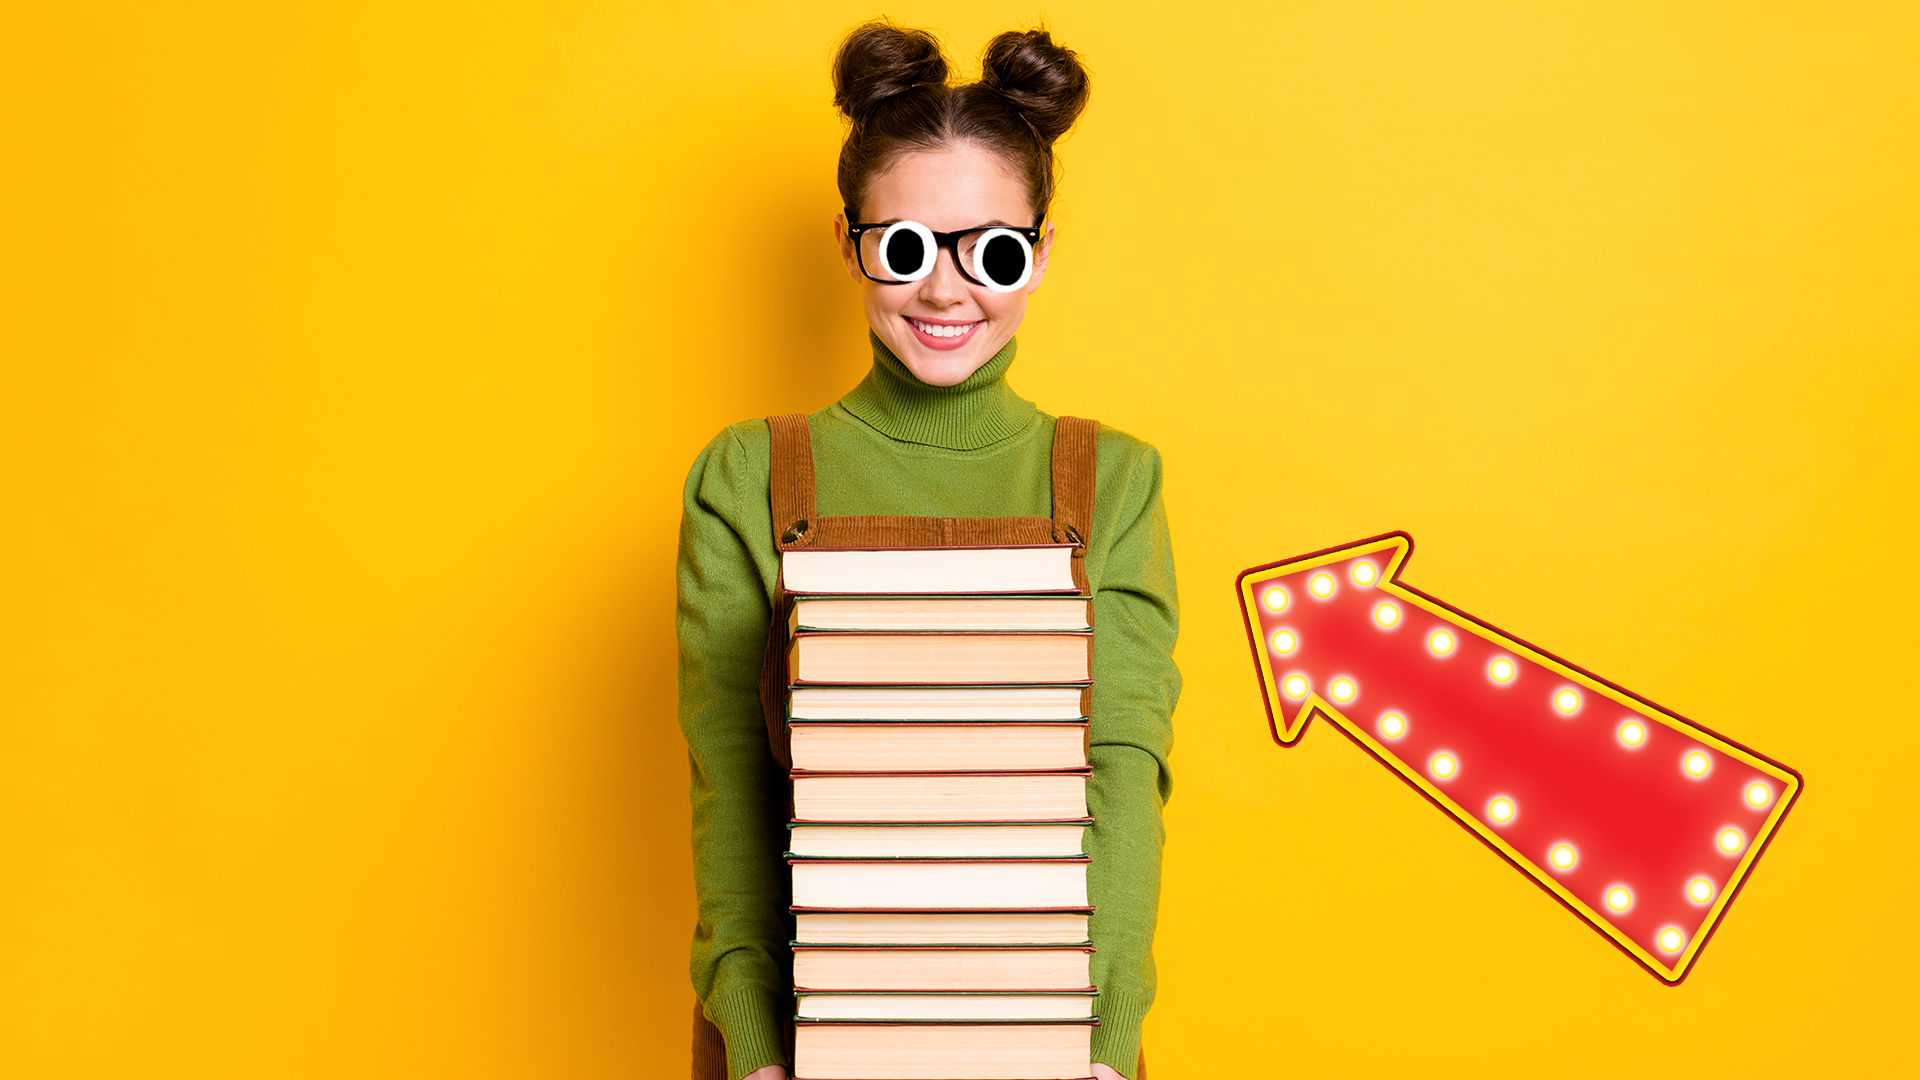 Nerdy looking girl with stack of books on yellow background and arrow 